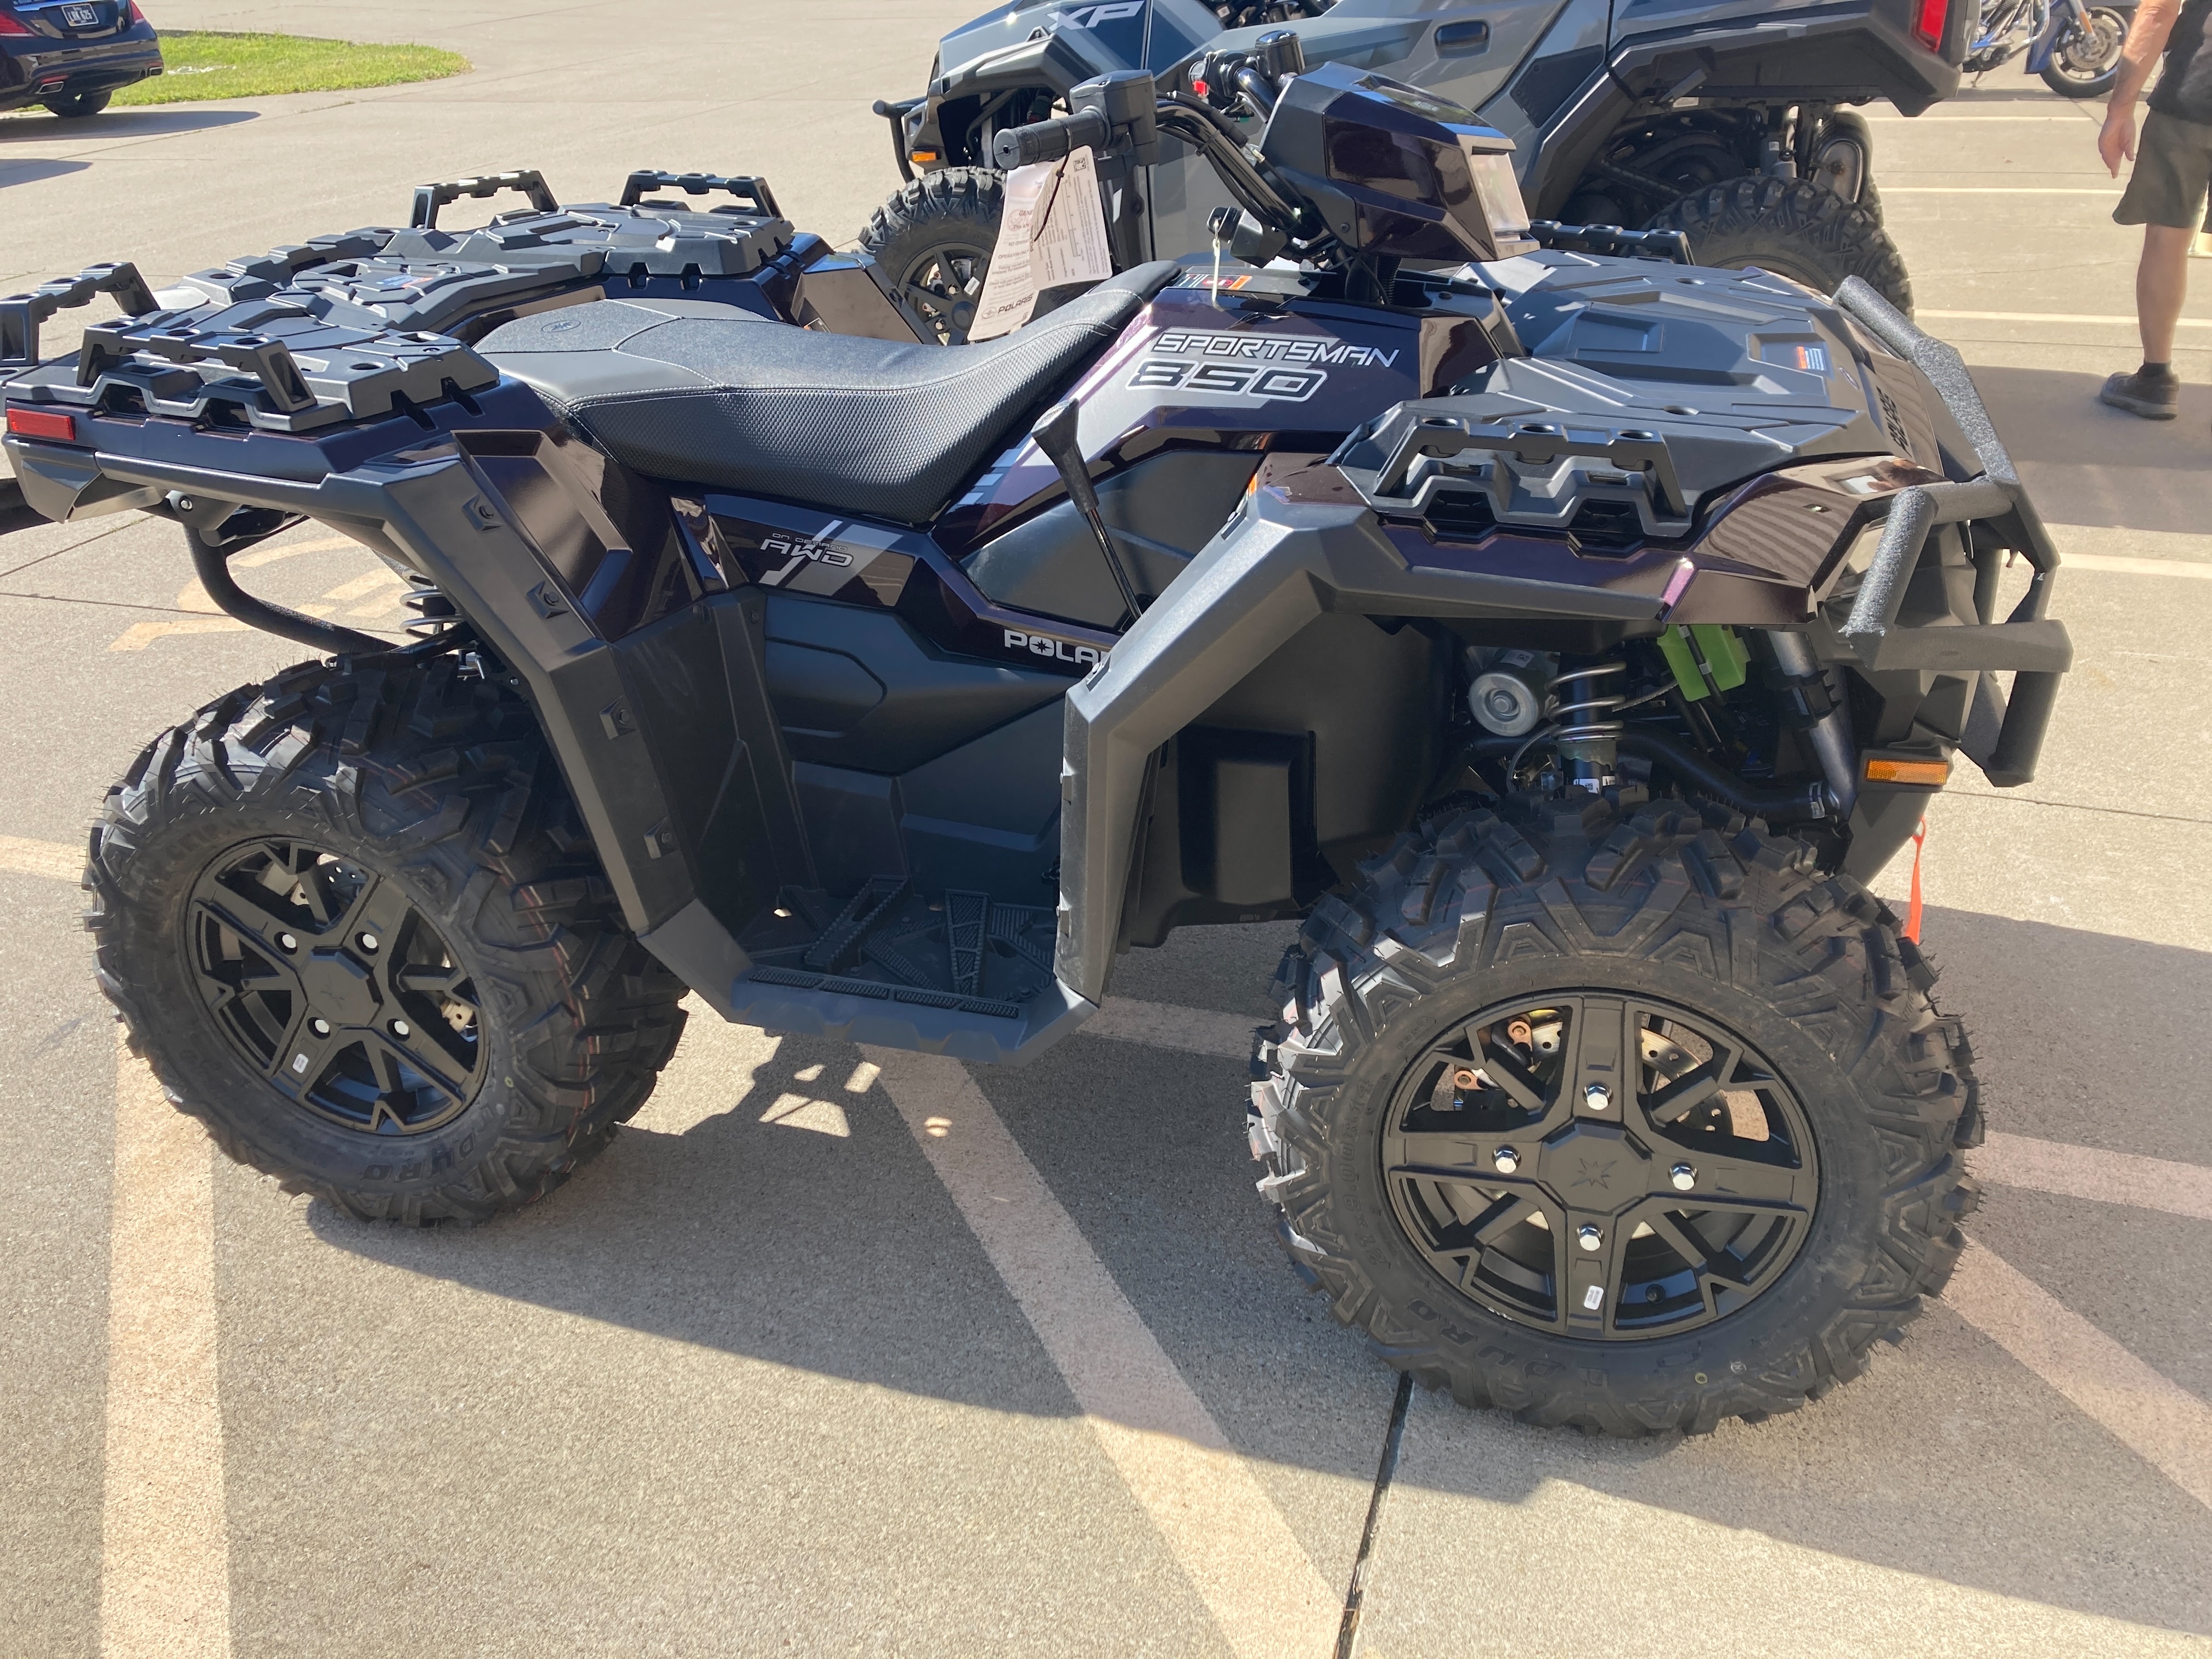 2023 Polaris Sportsman 850 Ultimate Trail at Brenny's Motorcycle Clinic, Bettendorf, IA 52722